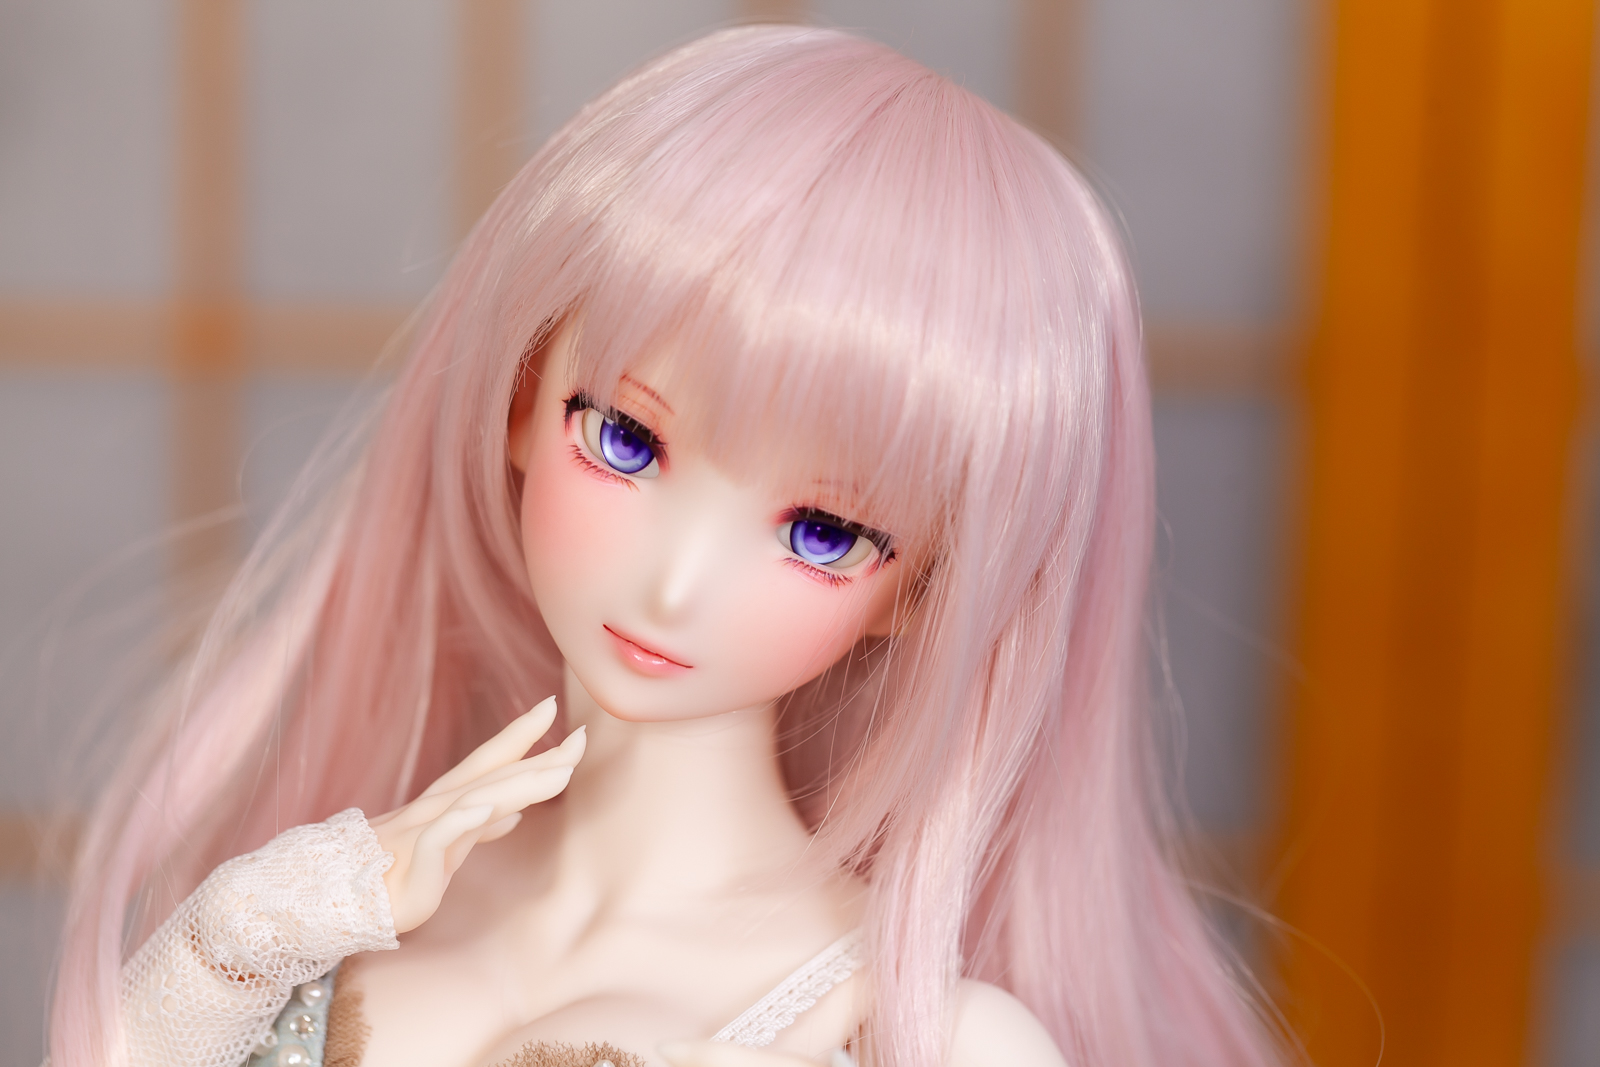 Unboxing Smart Doll Athena – Pictures, Default Look & more